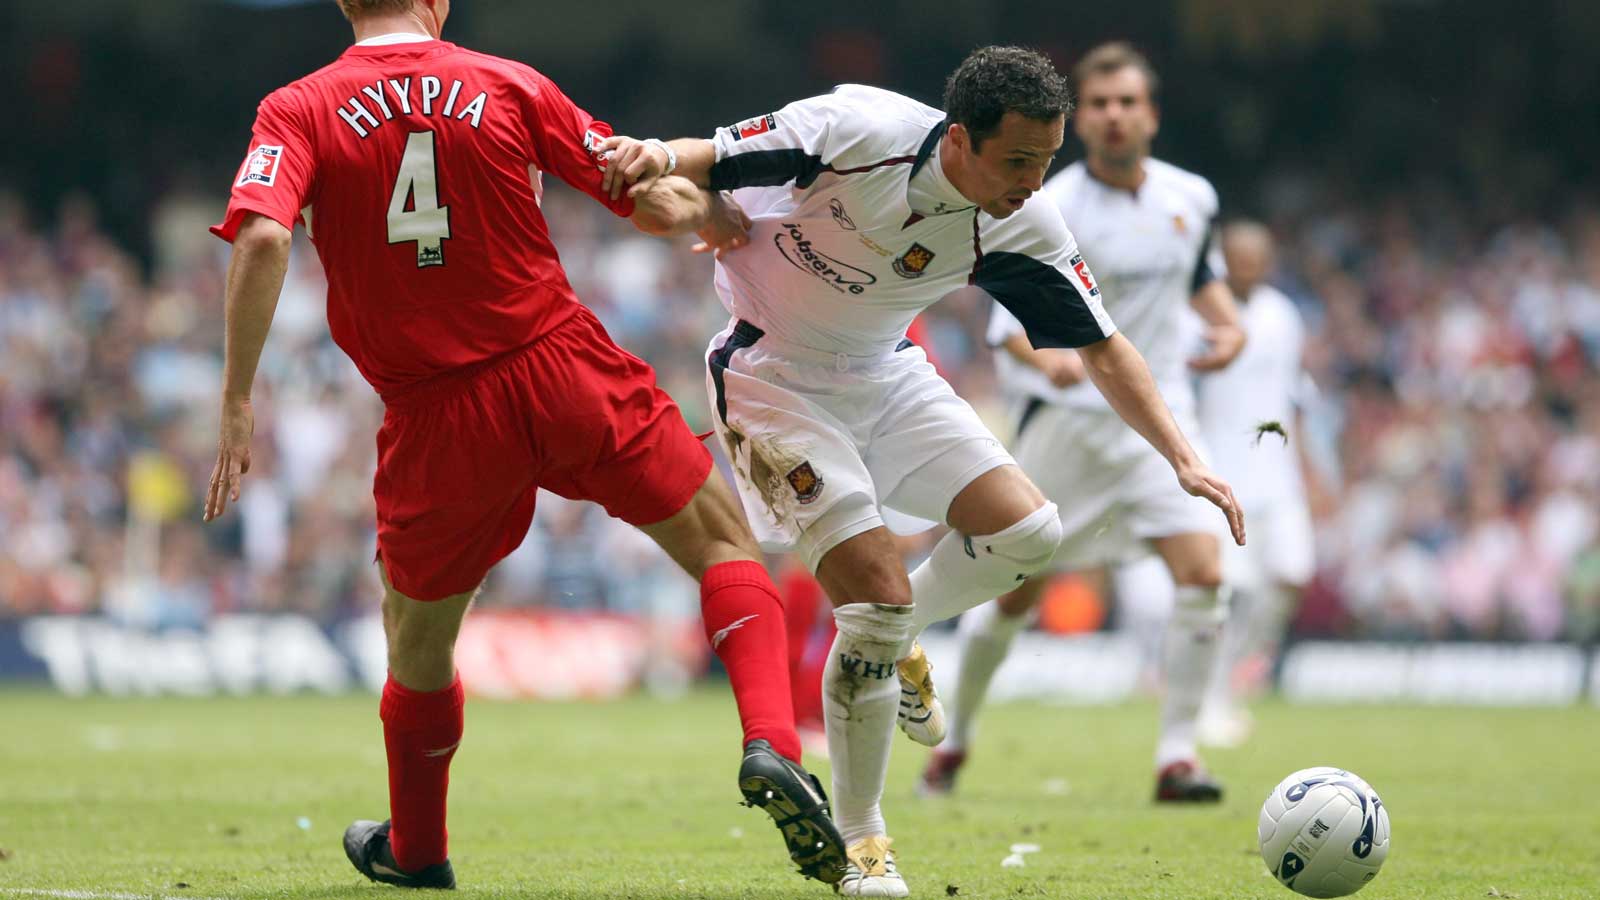 Matty Etherington in action in the 2006 FA Cup final